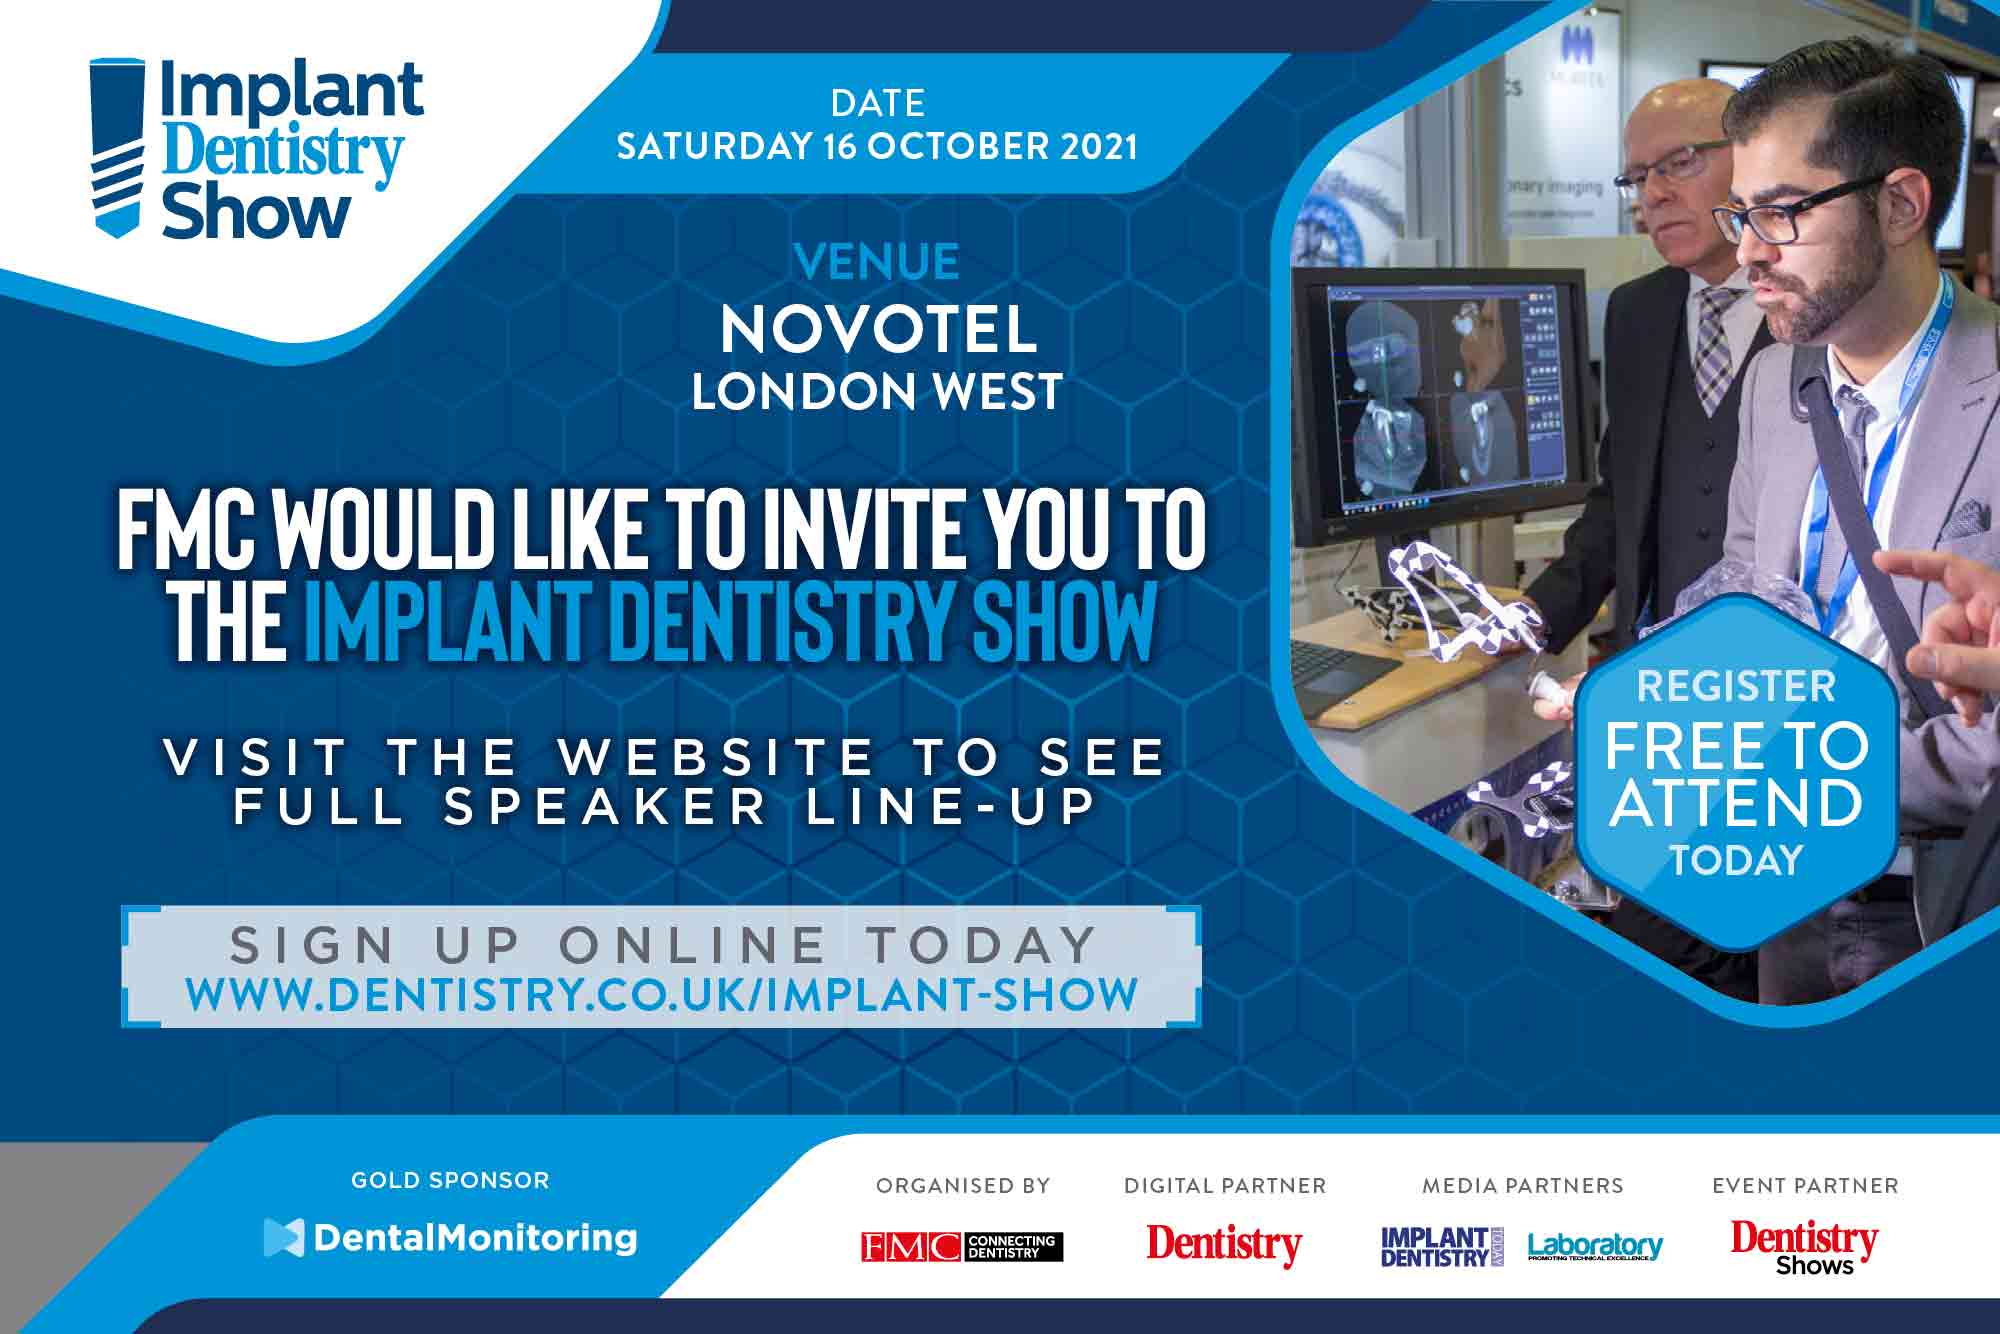 Implant Dentistry Show – the UK's biggest dedicated implant event this year